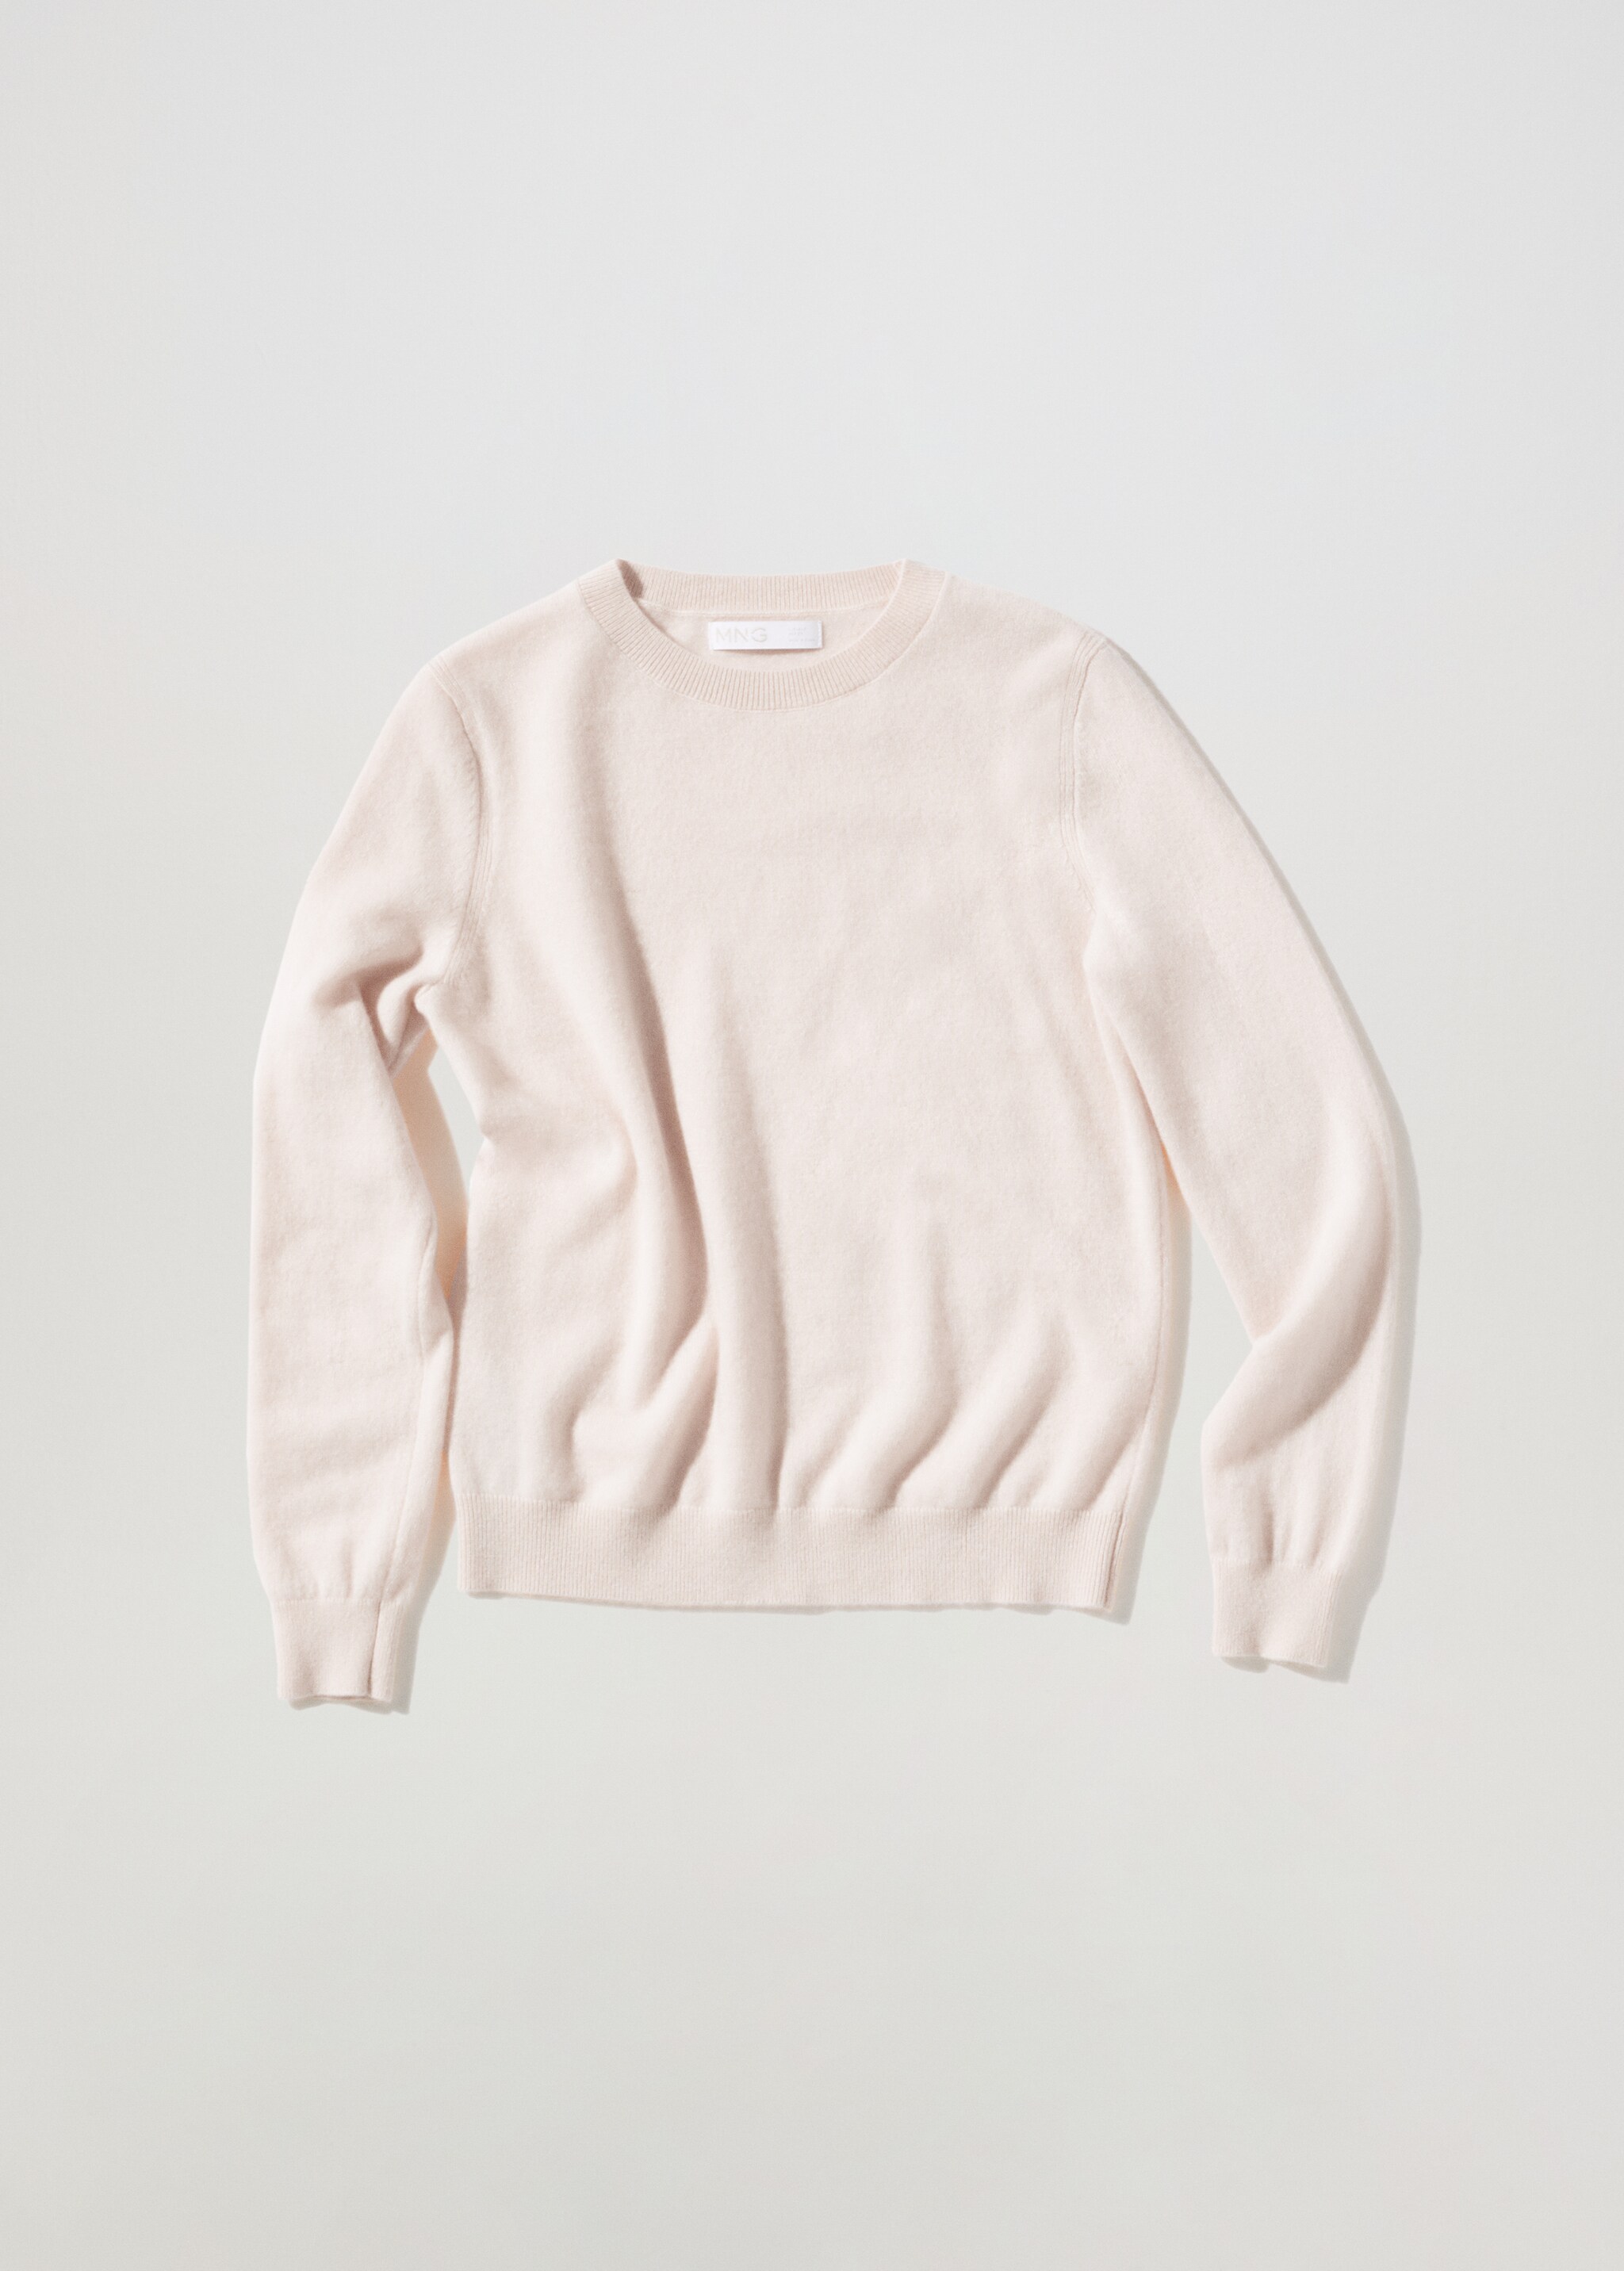 100% cashmere sweater - Article without model